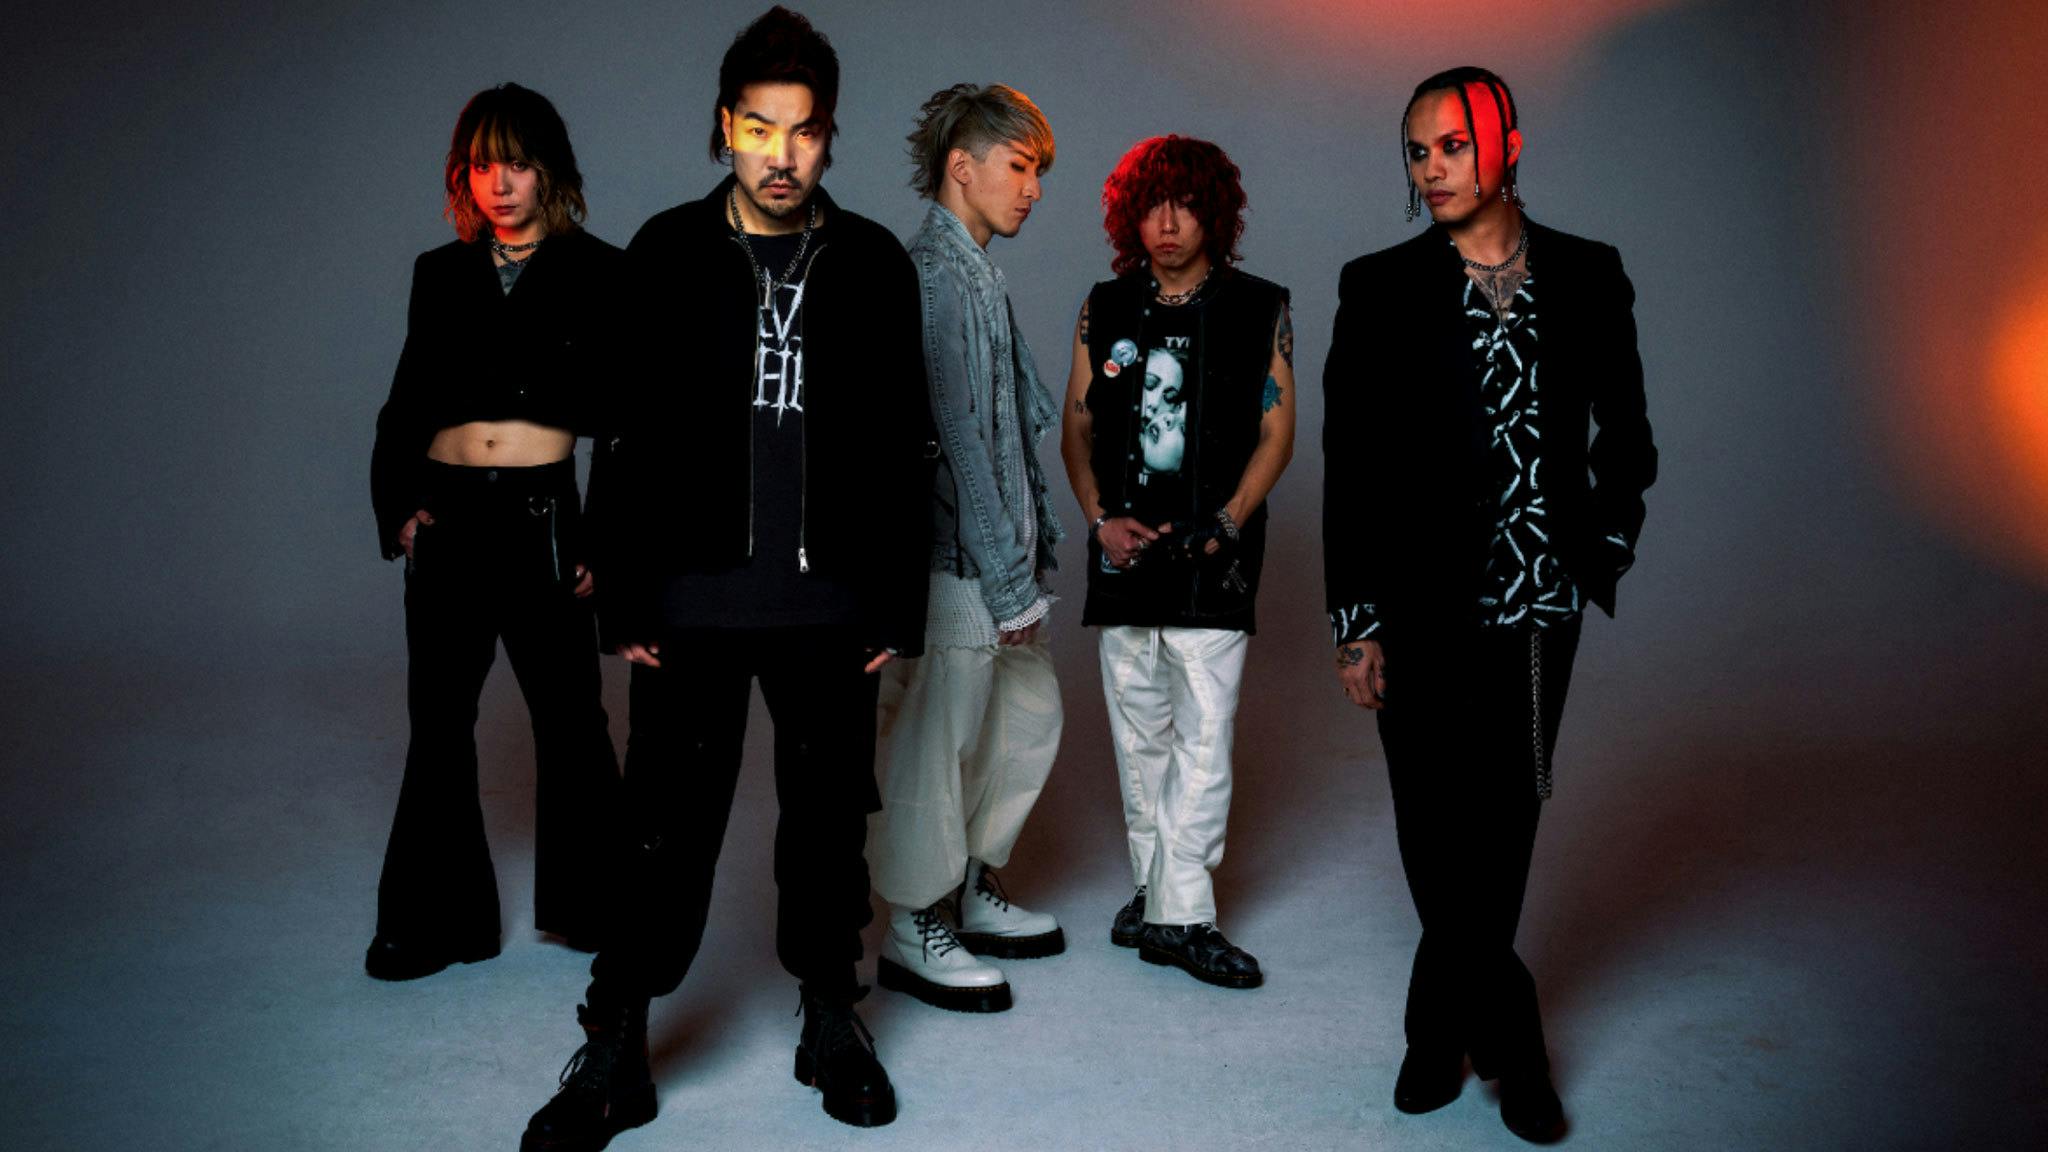 Crossfaith are “back in the game” with new single ZERO